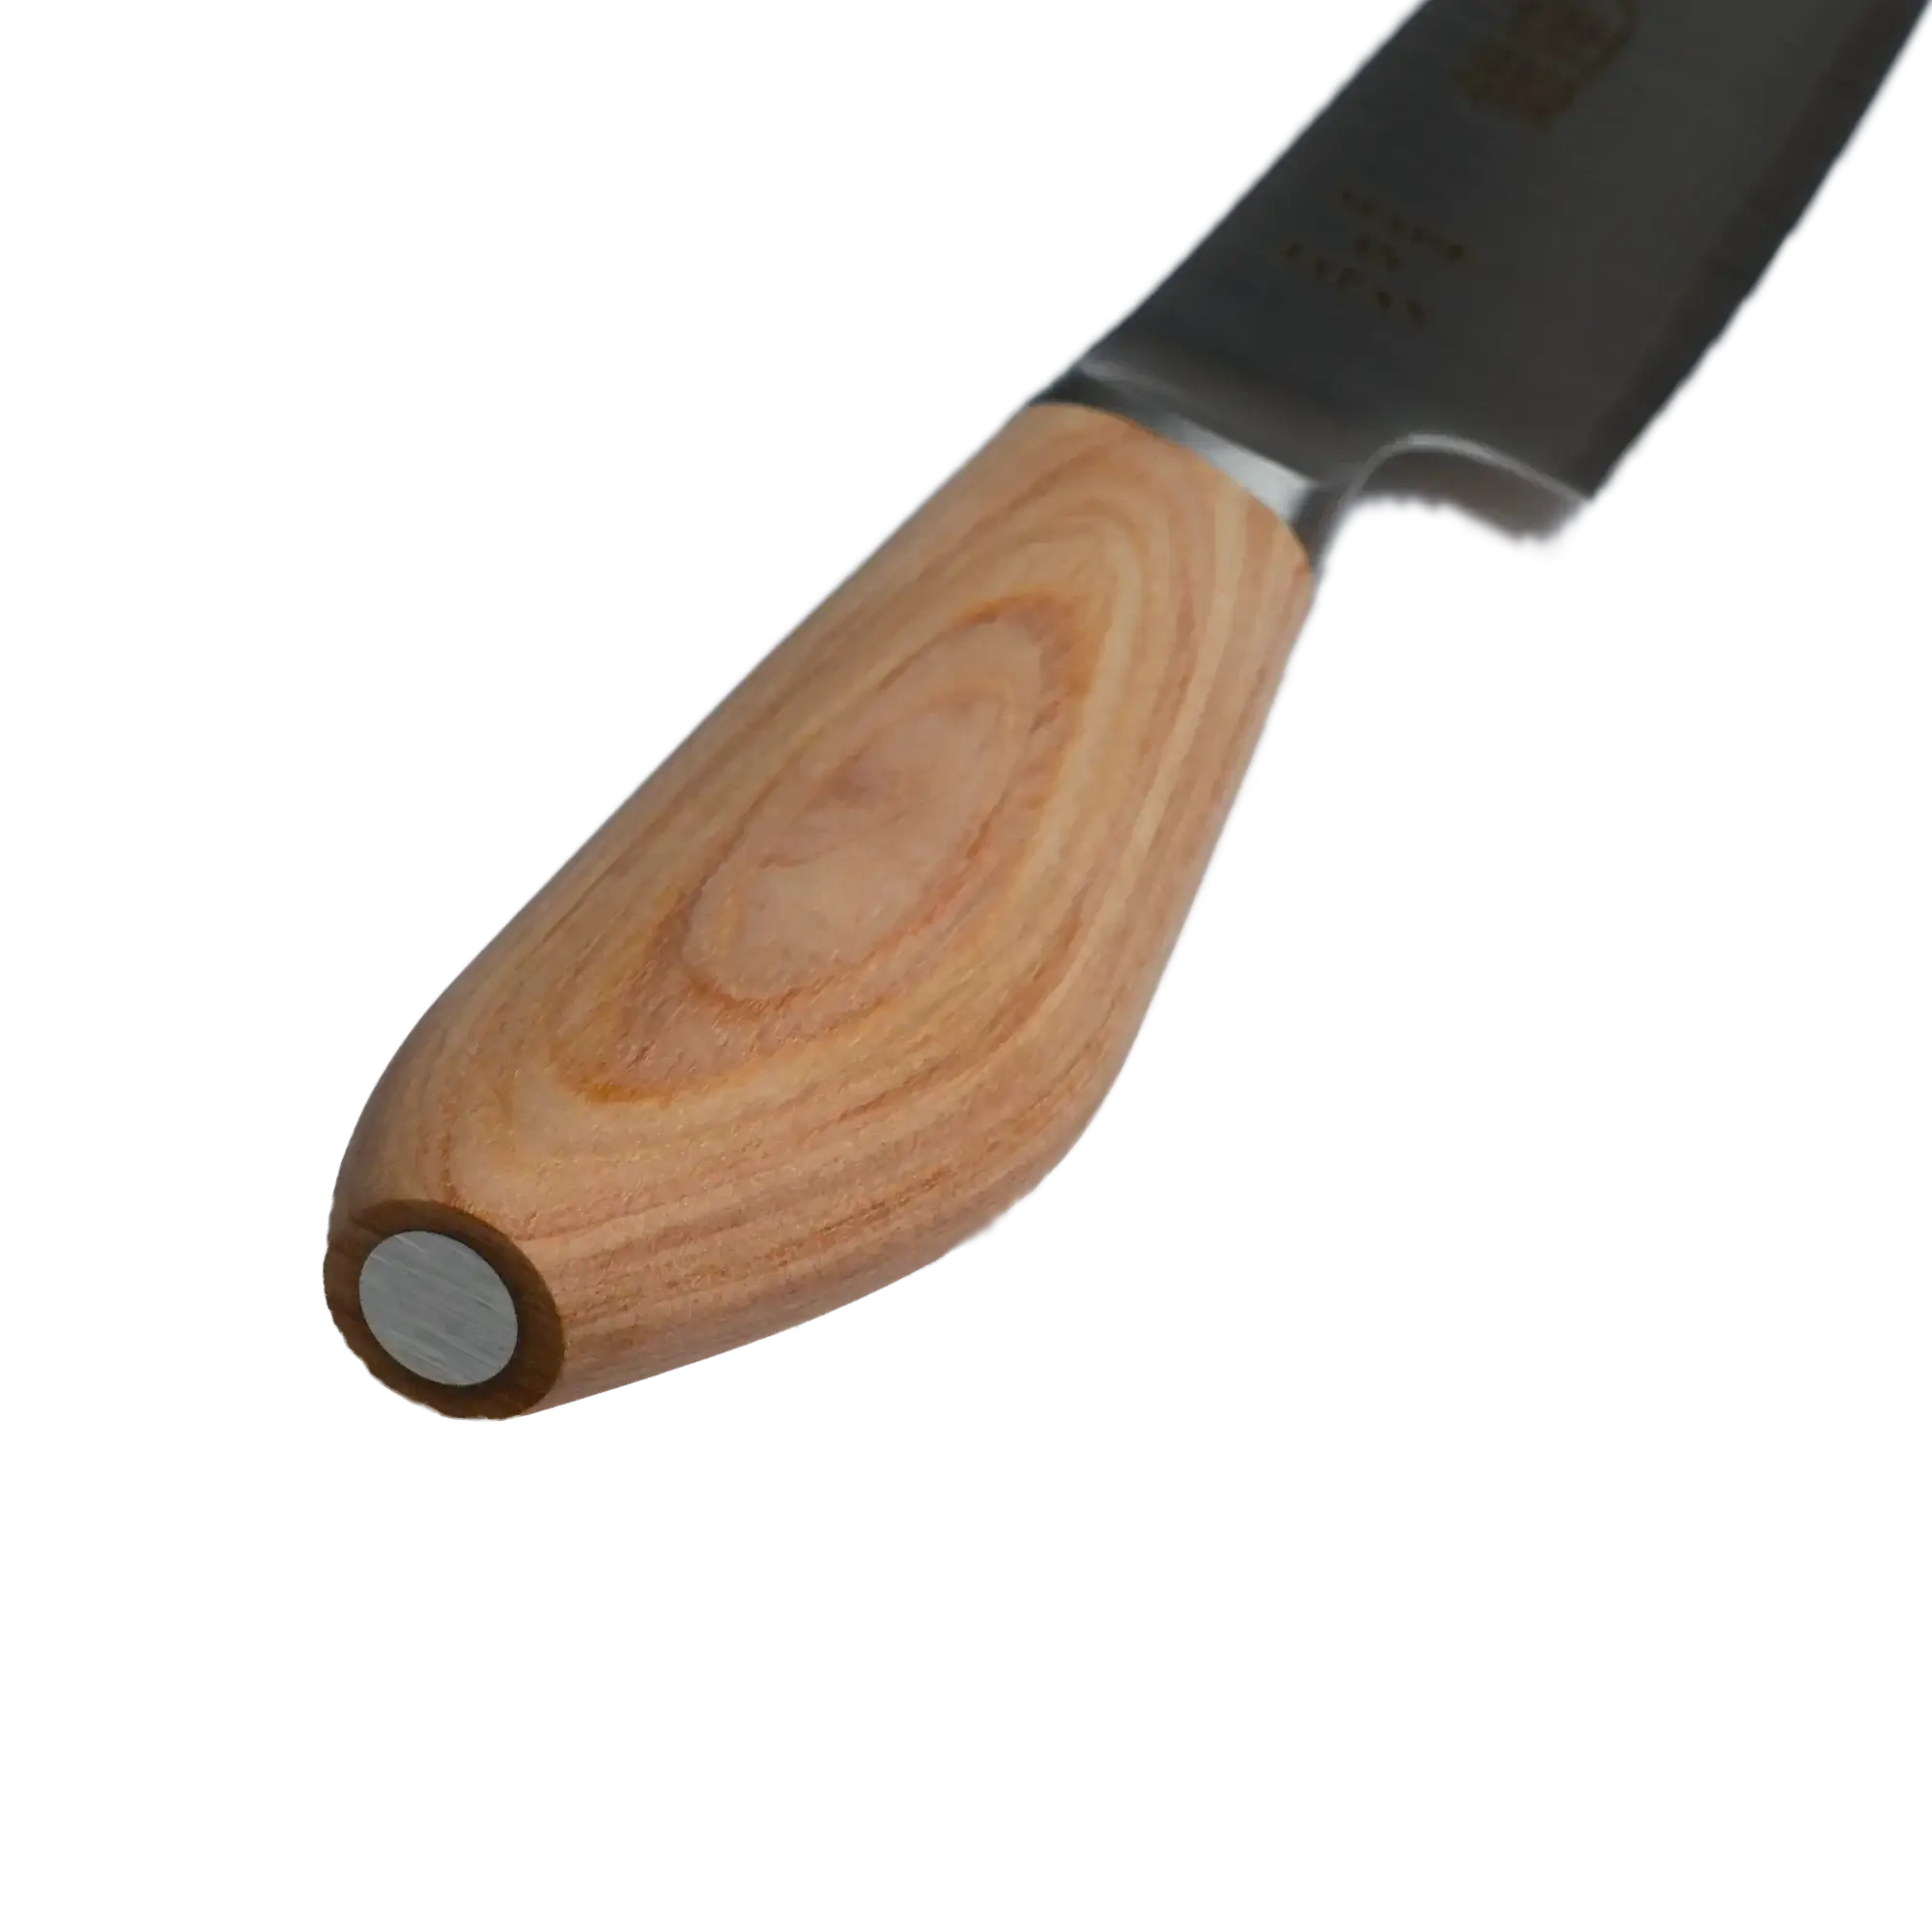 MATSUE 130 | MV Stainless Steel Petty Knife 130mm/Natural Wood Handle